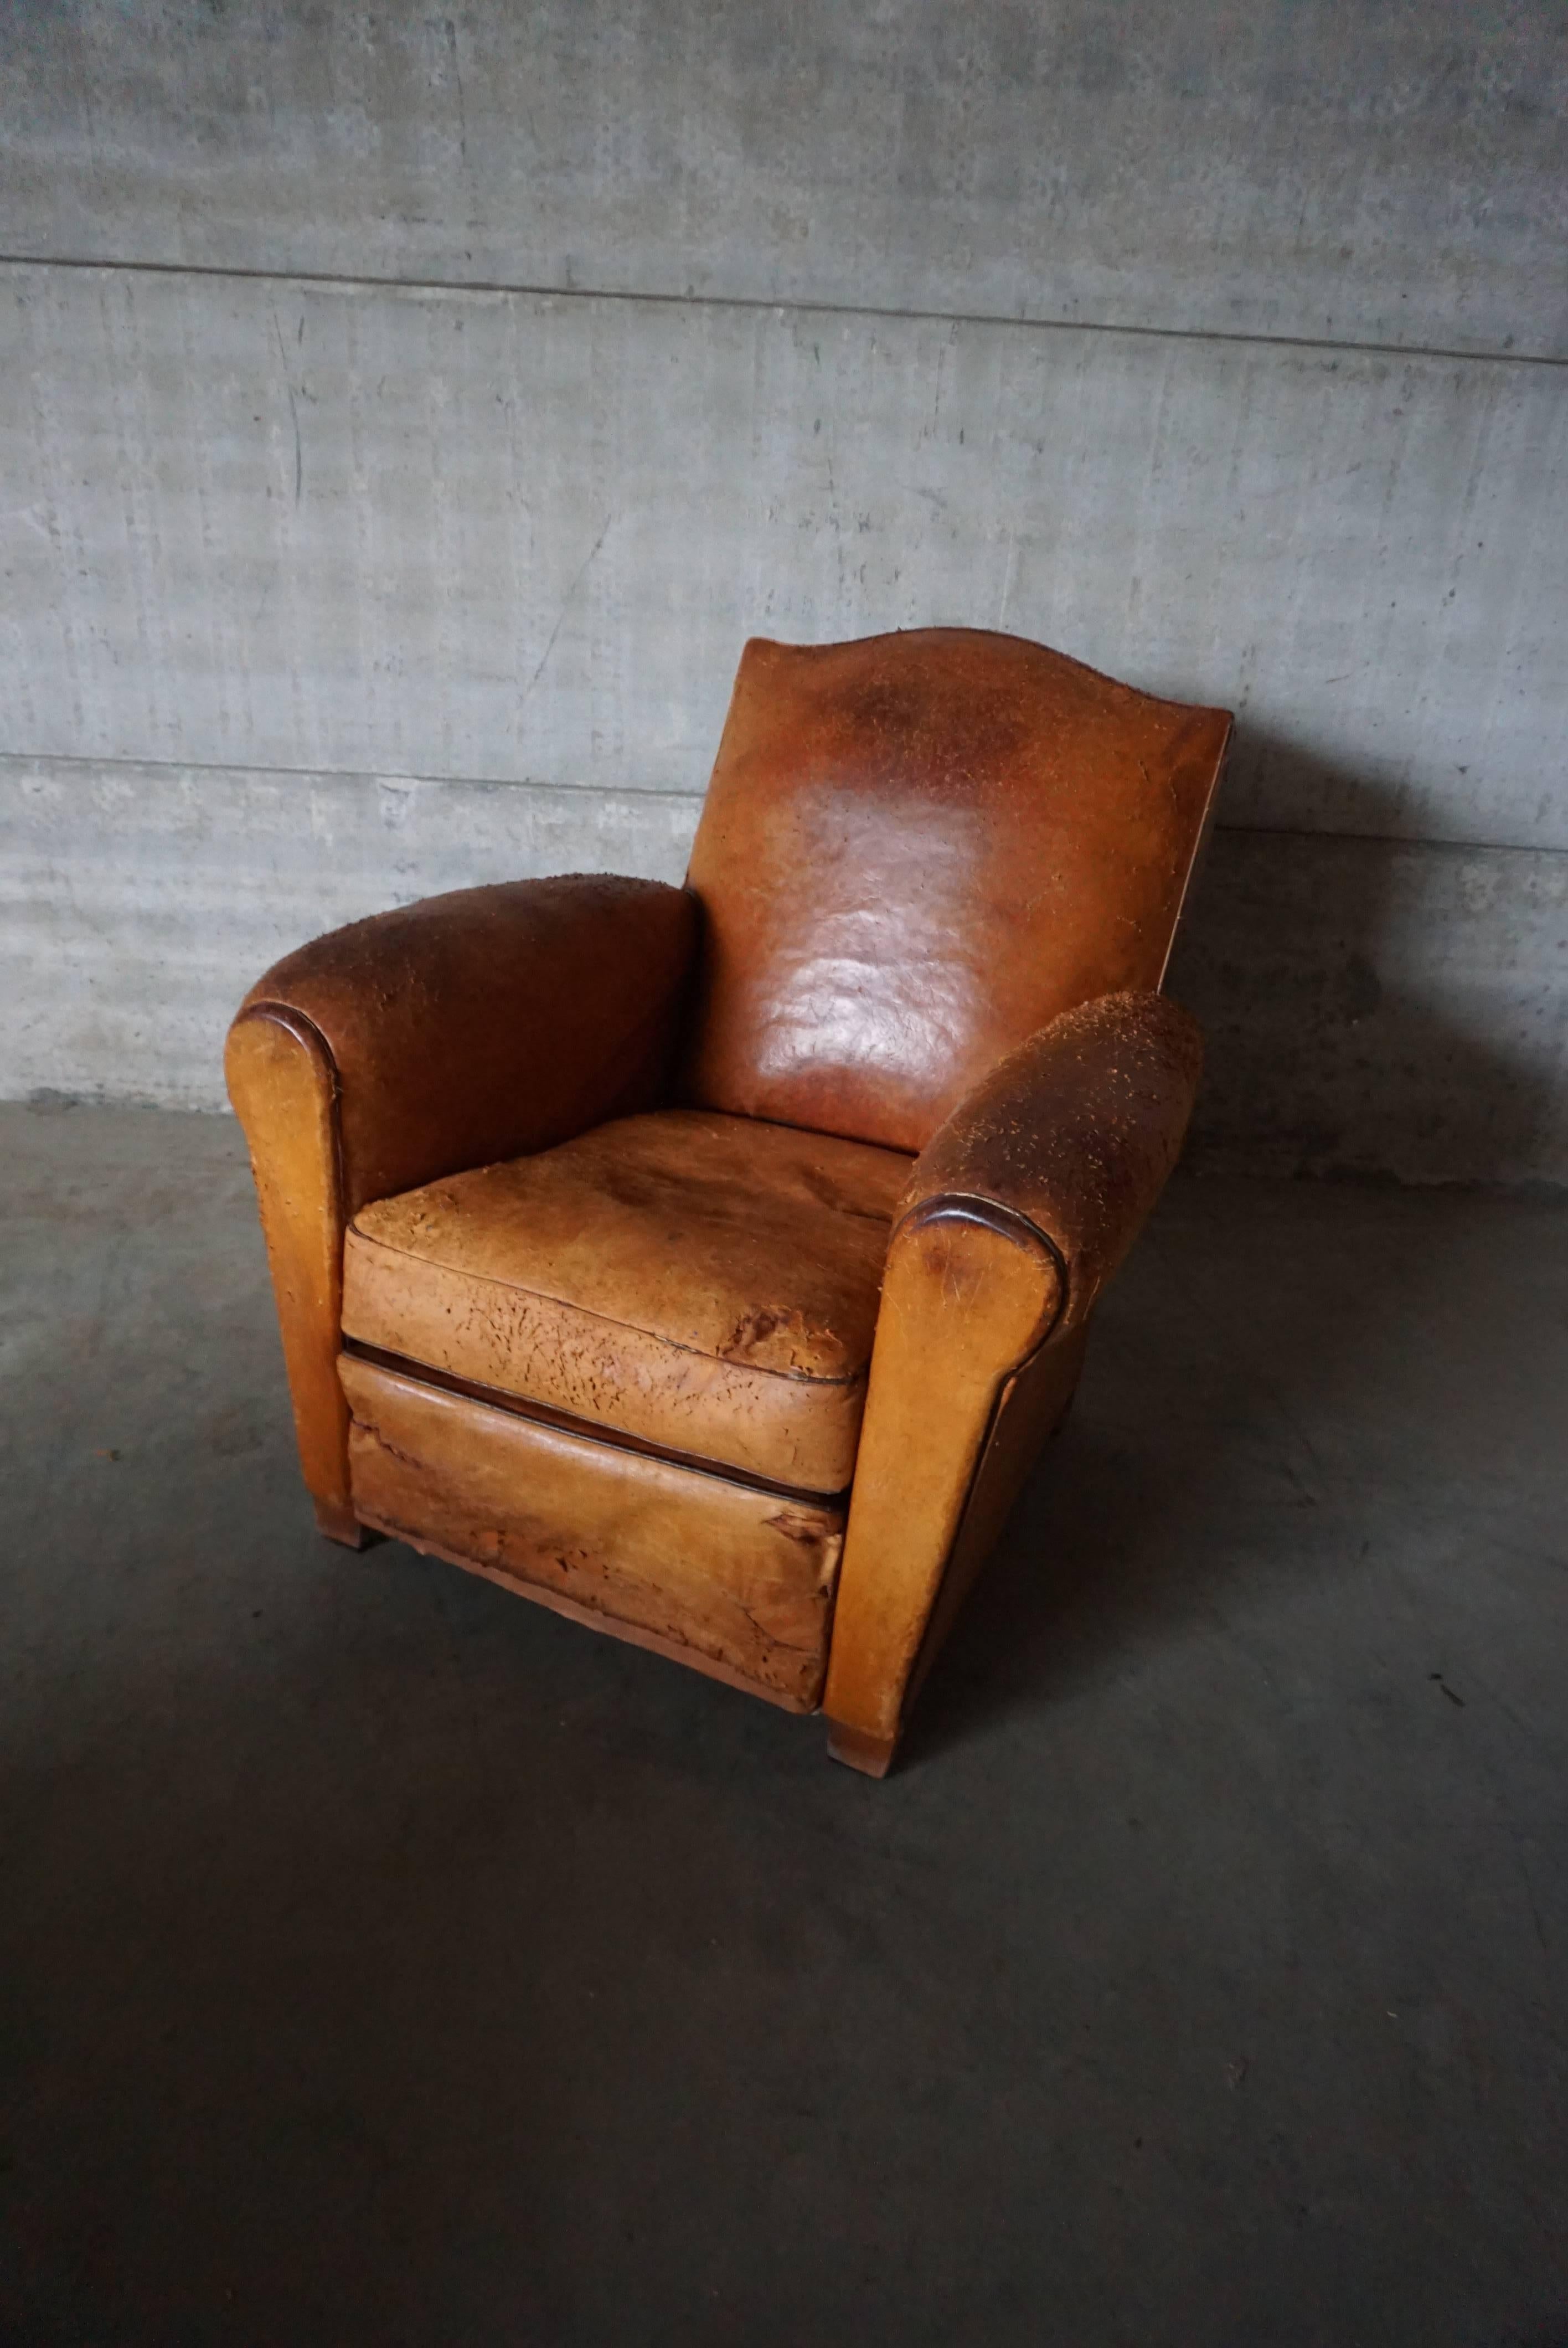 This club chair was designed and produced in France during the 1930s. The chair is made from cognac leather held together with metal pins and mounted on wooden legs. The lounge chair is in fair vintage condition with signs of use and repairs.